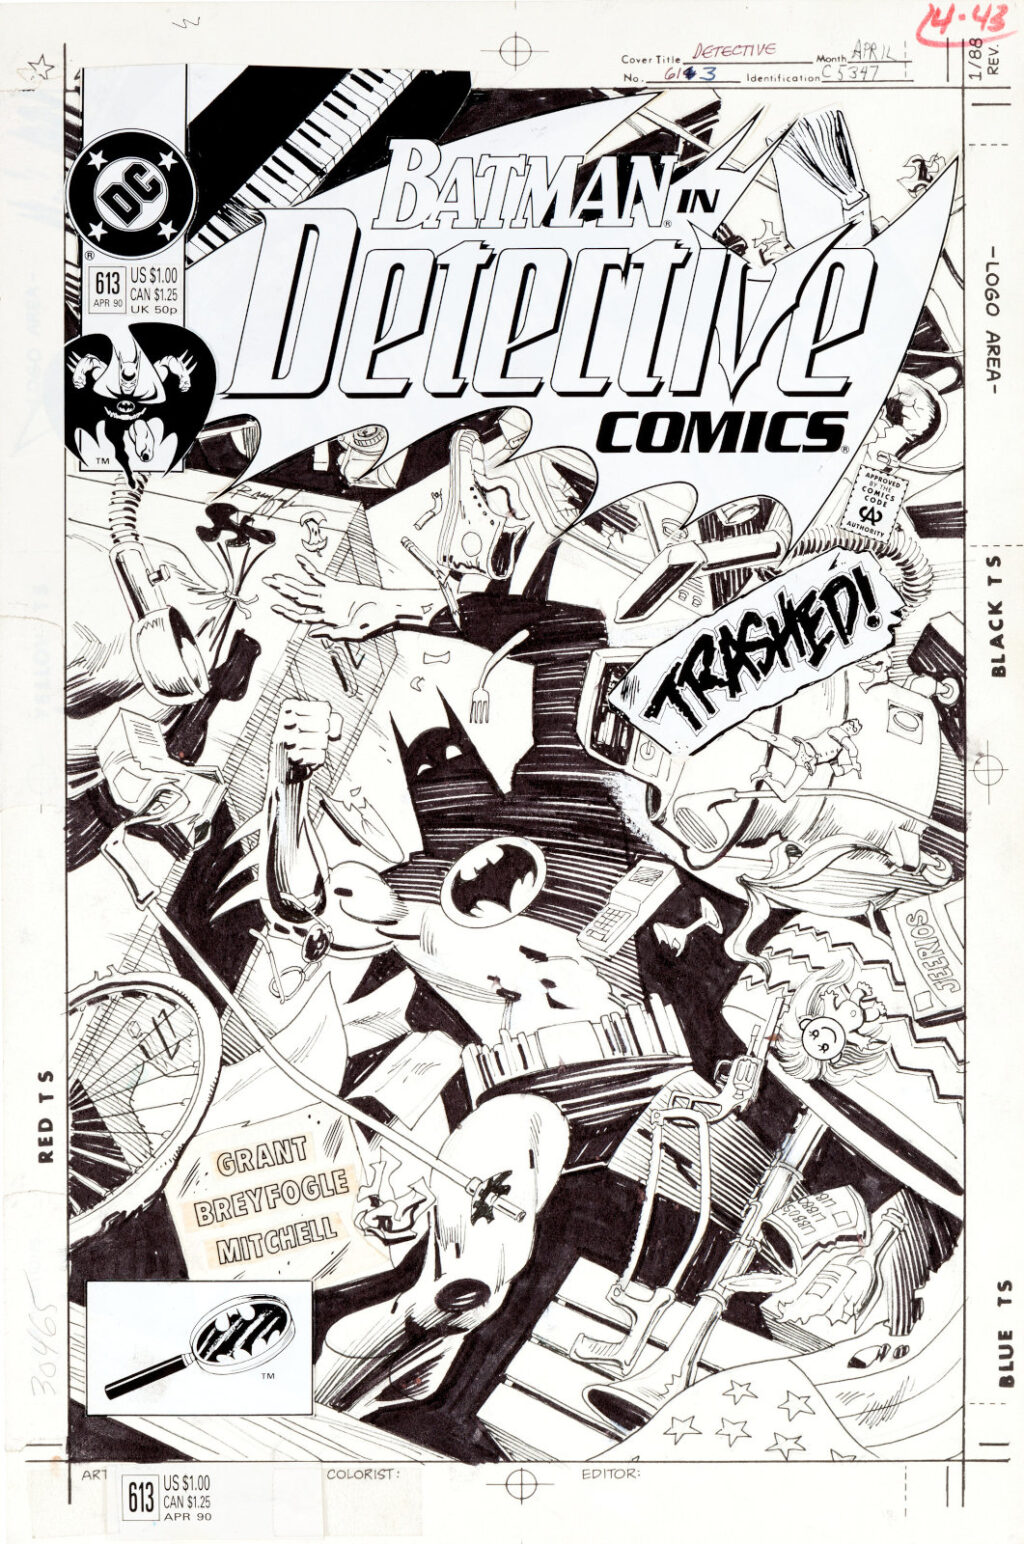 Detective Comics issue 613 by Norm Breyfogle